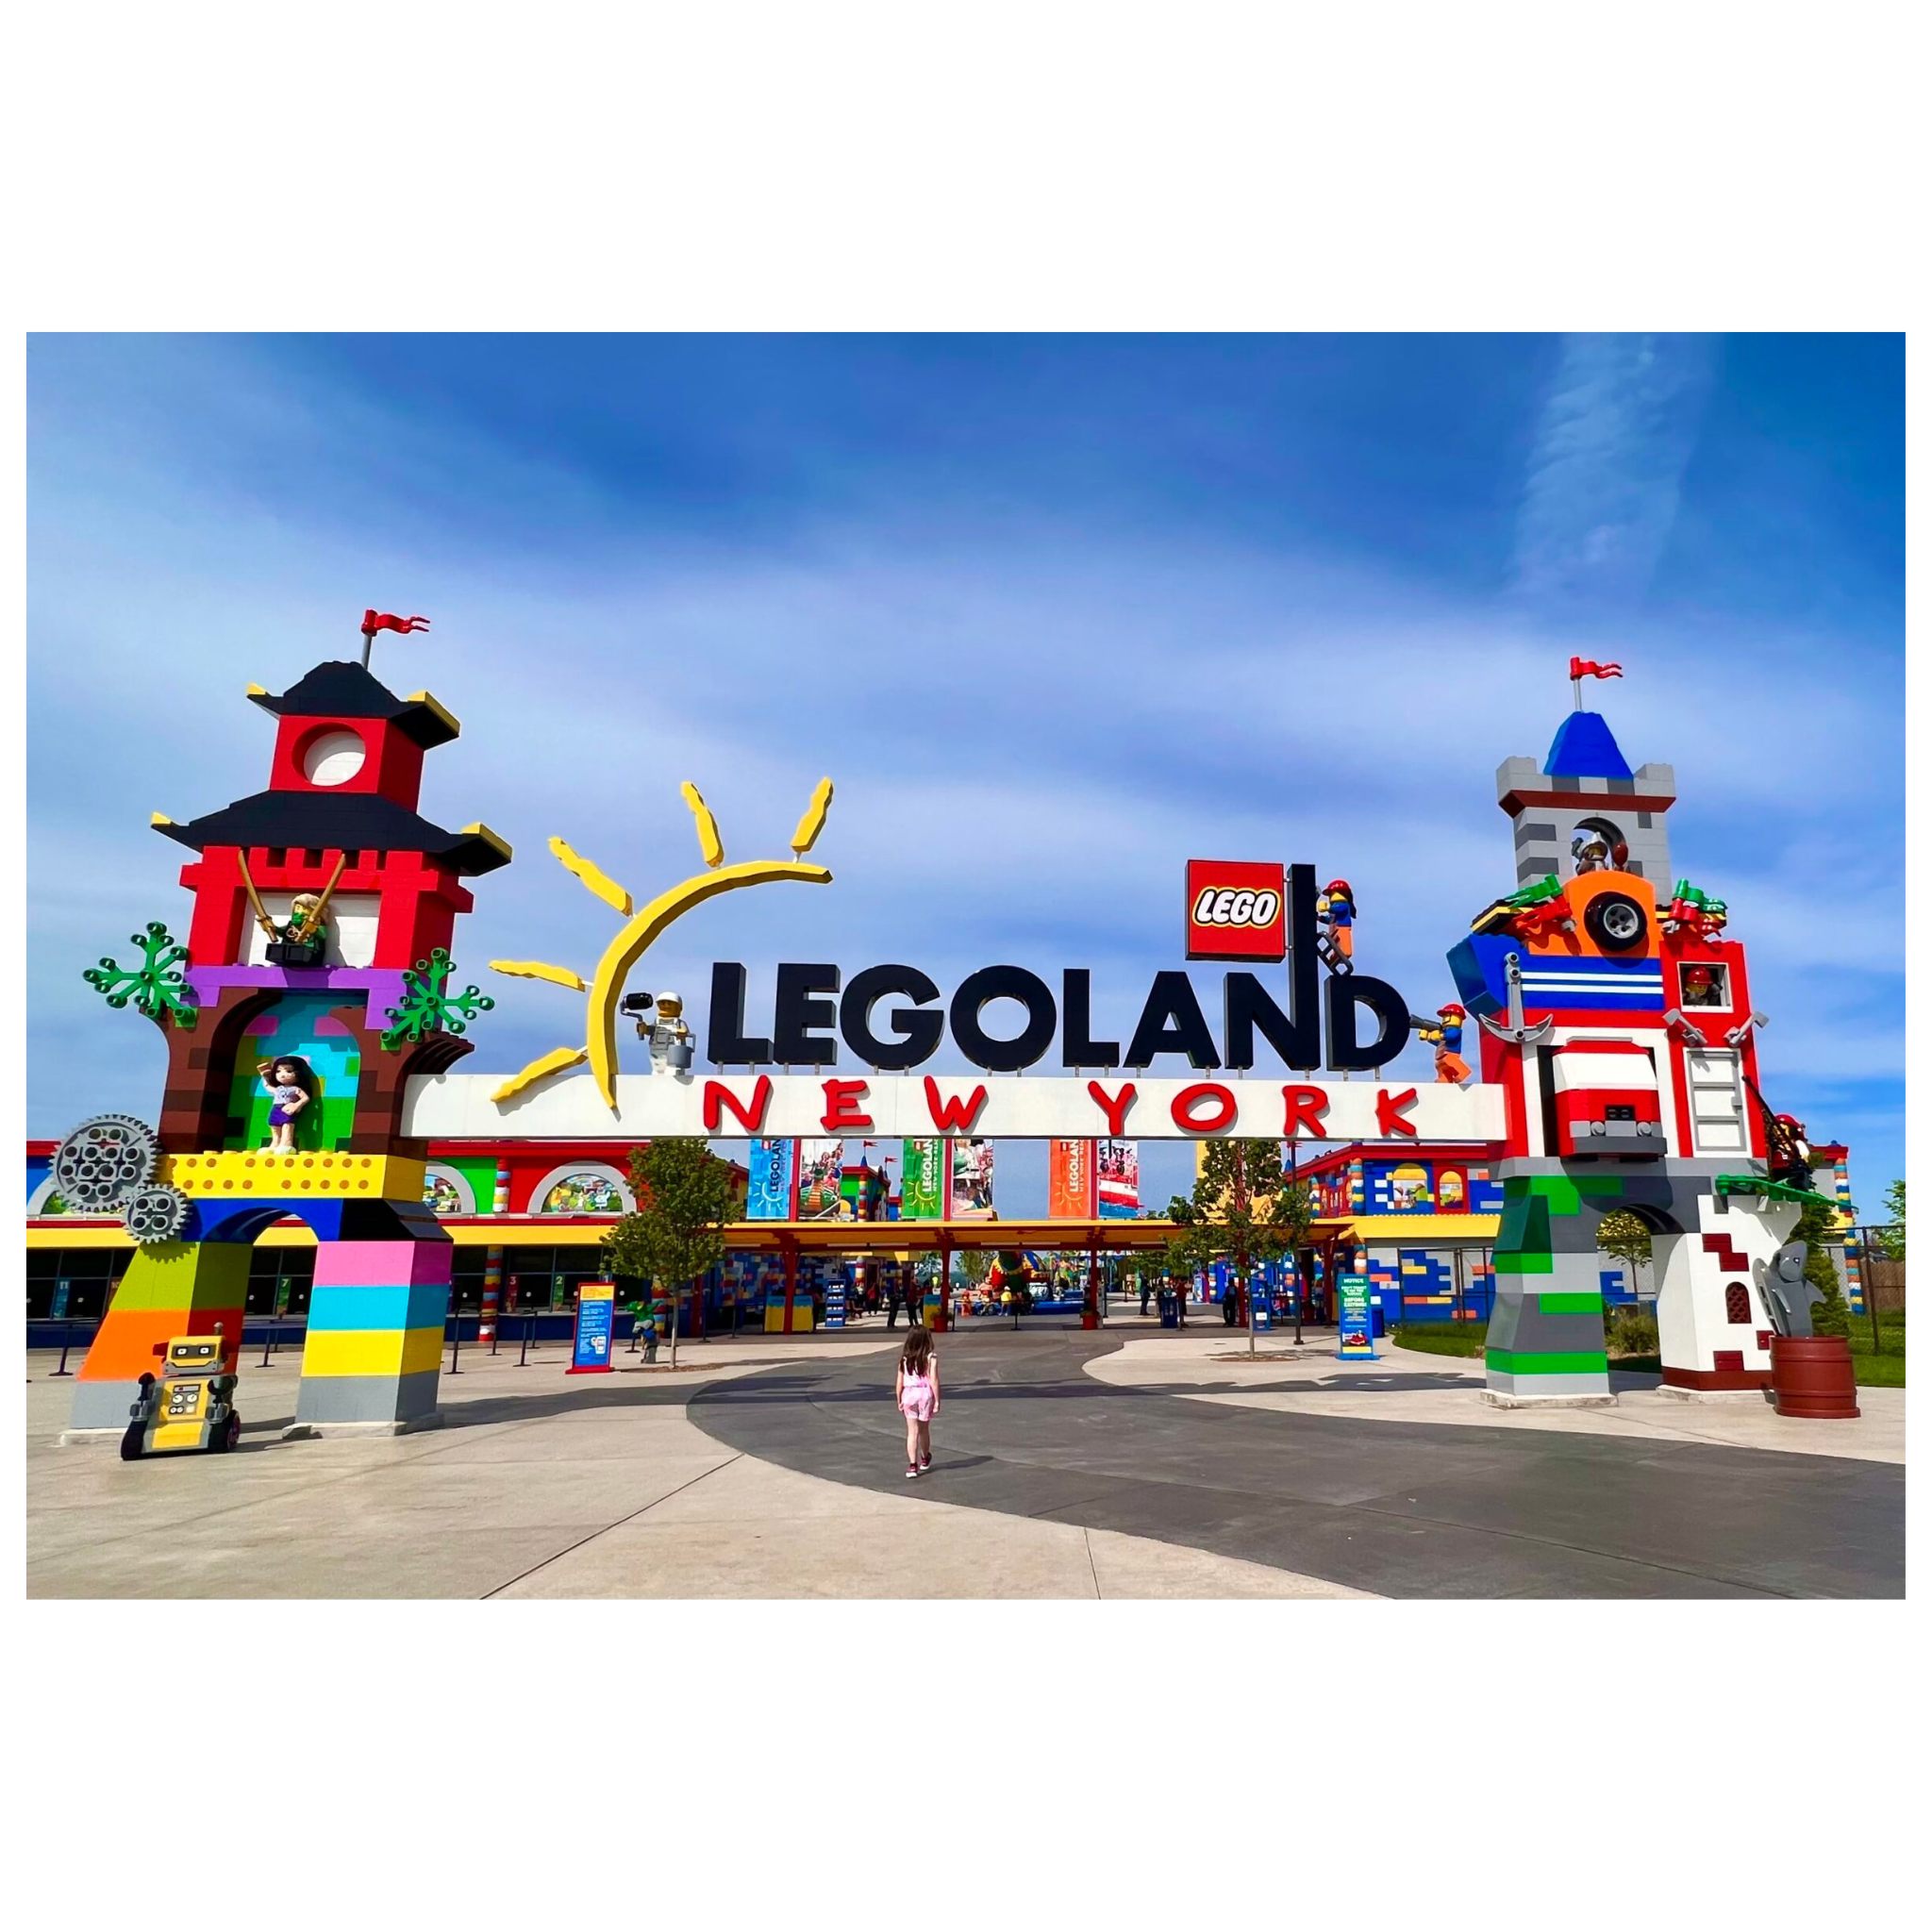 Free Adult Ticket To Legoland with Kids Ticket Purchase